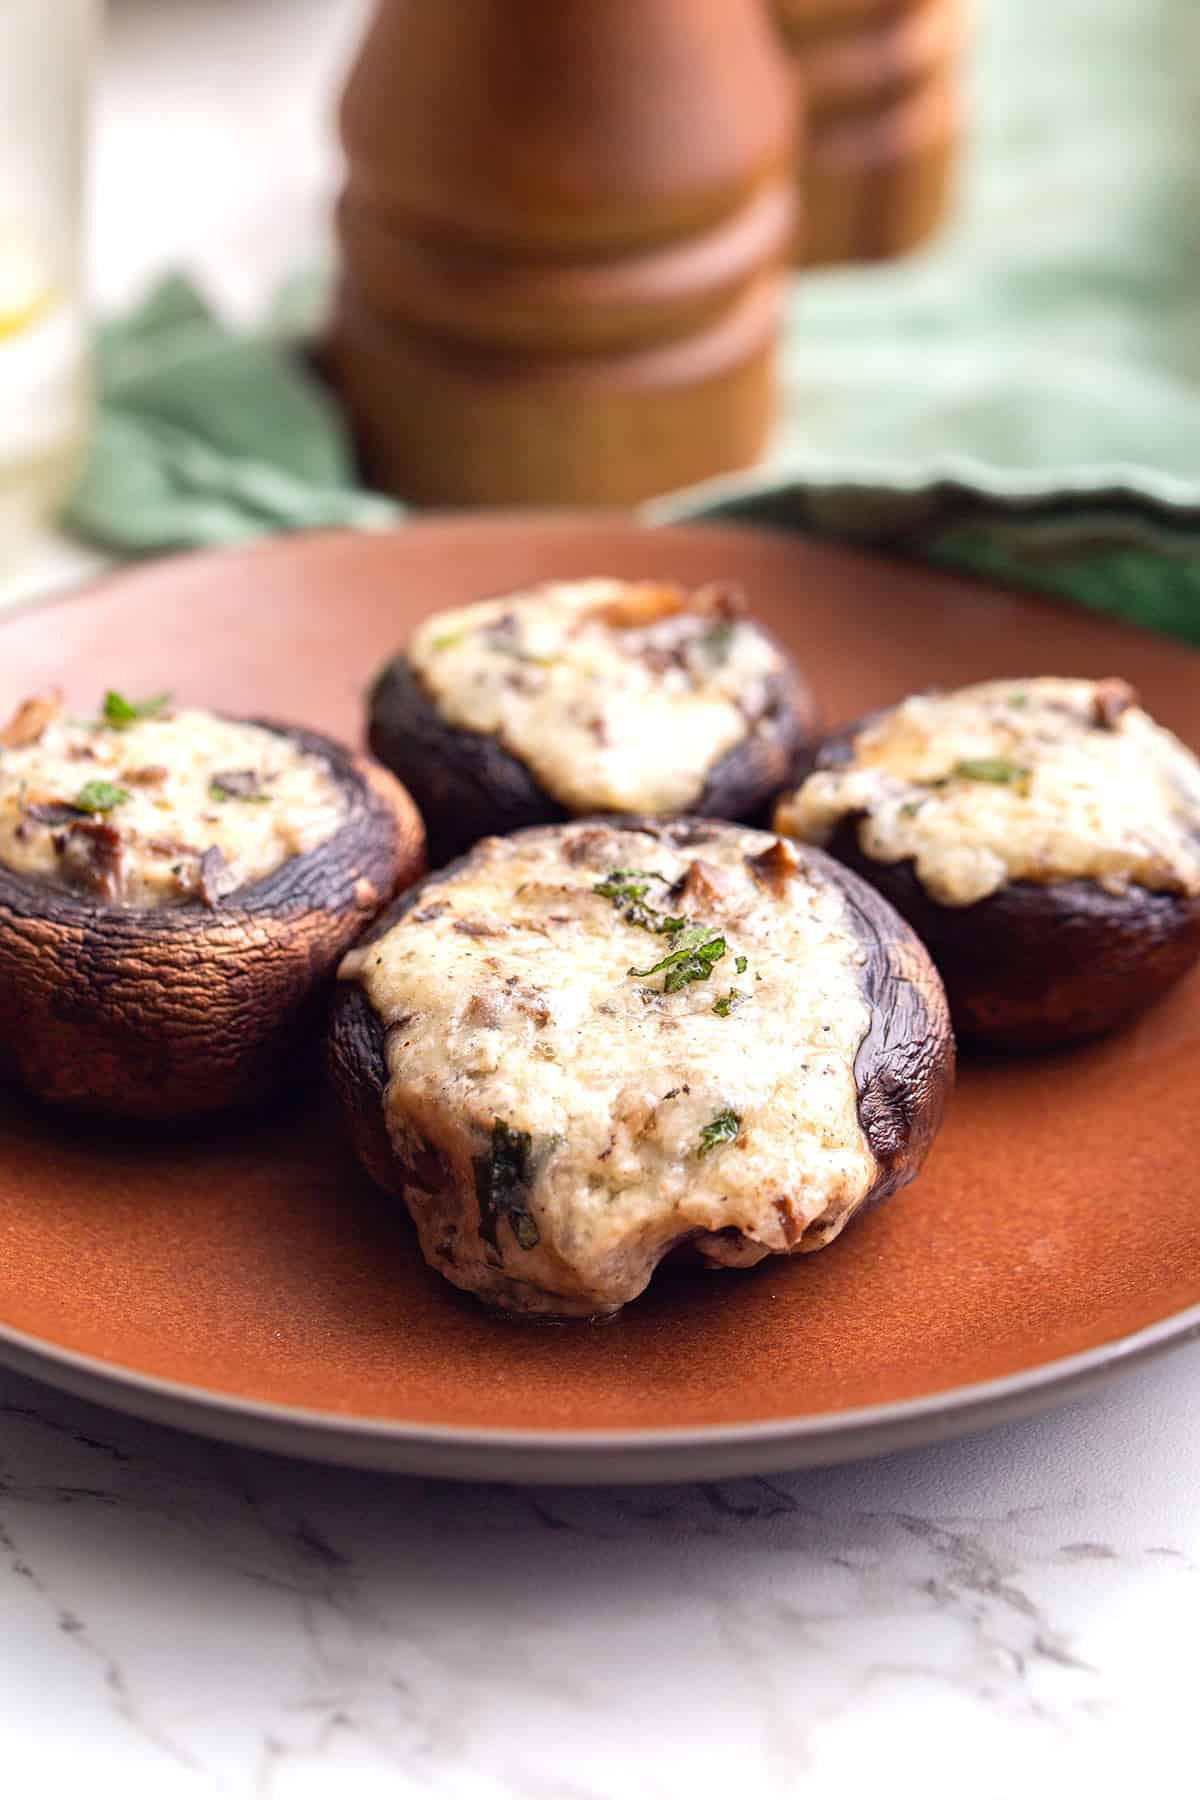 Four Keto Stuffed Mushrooms sit on a brown plate in front of a green napkin.